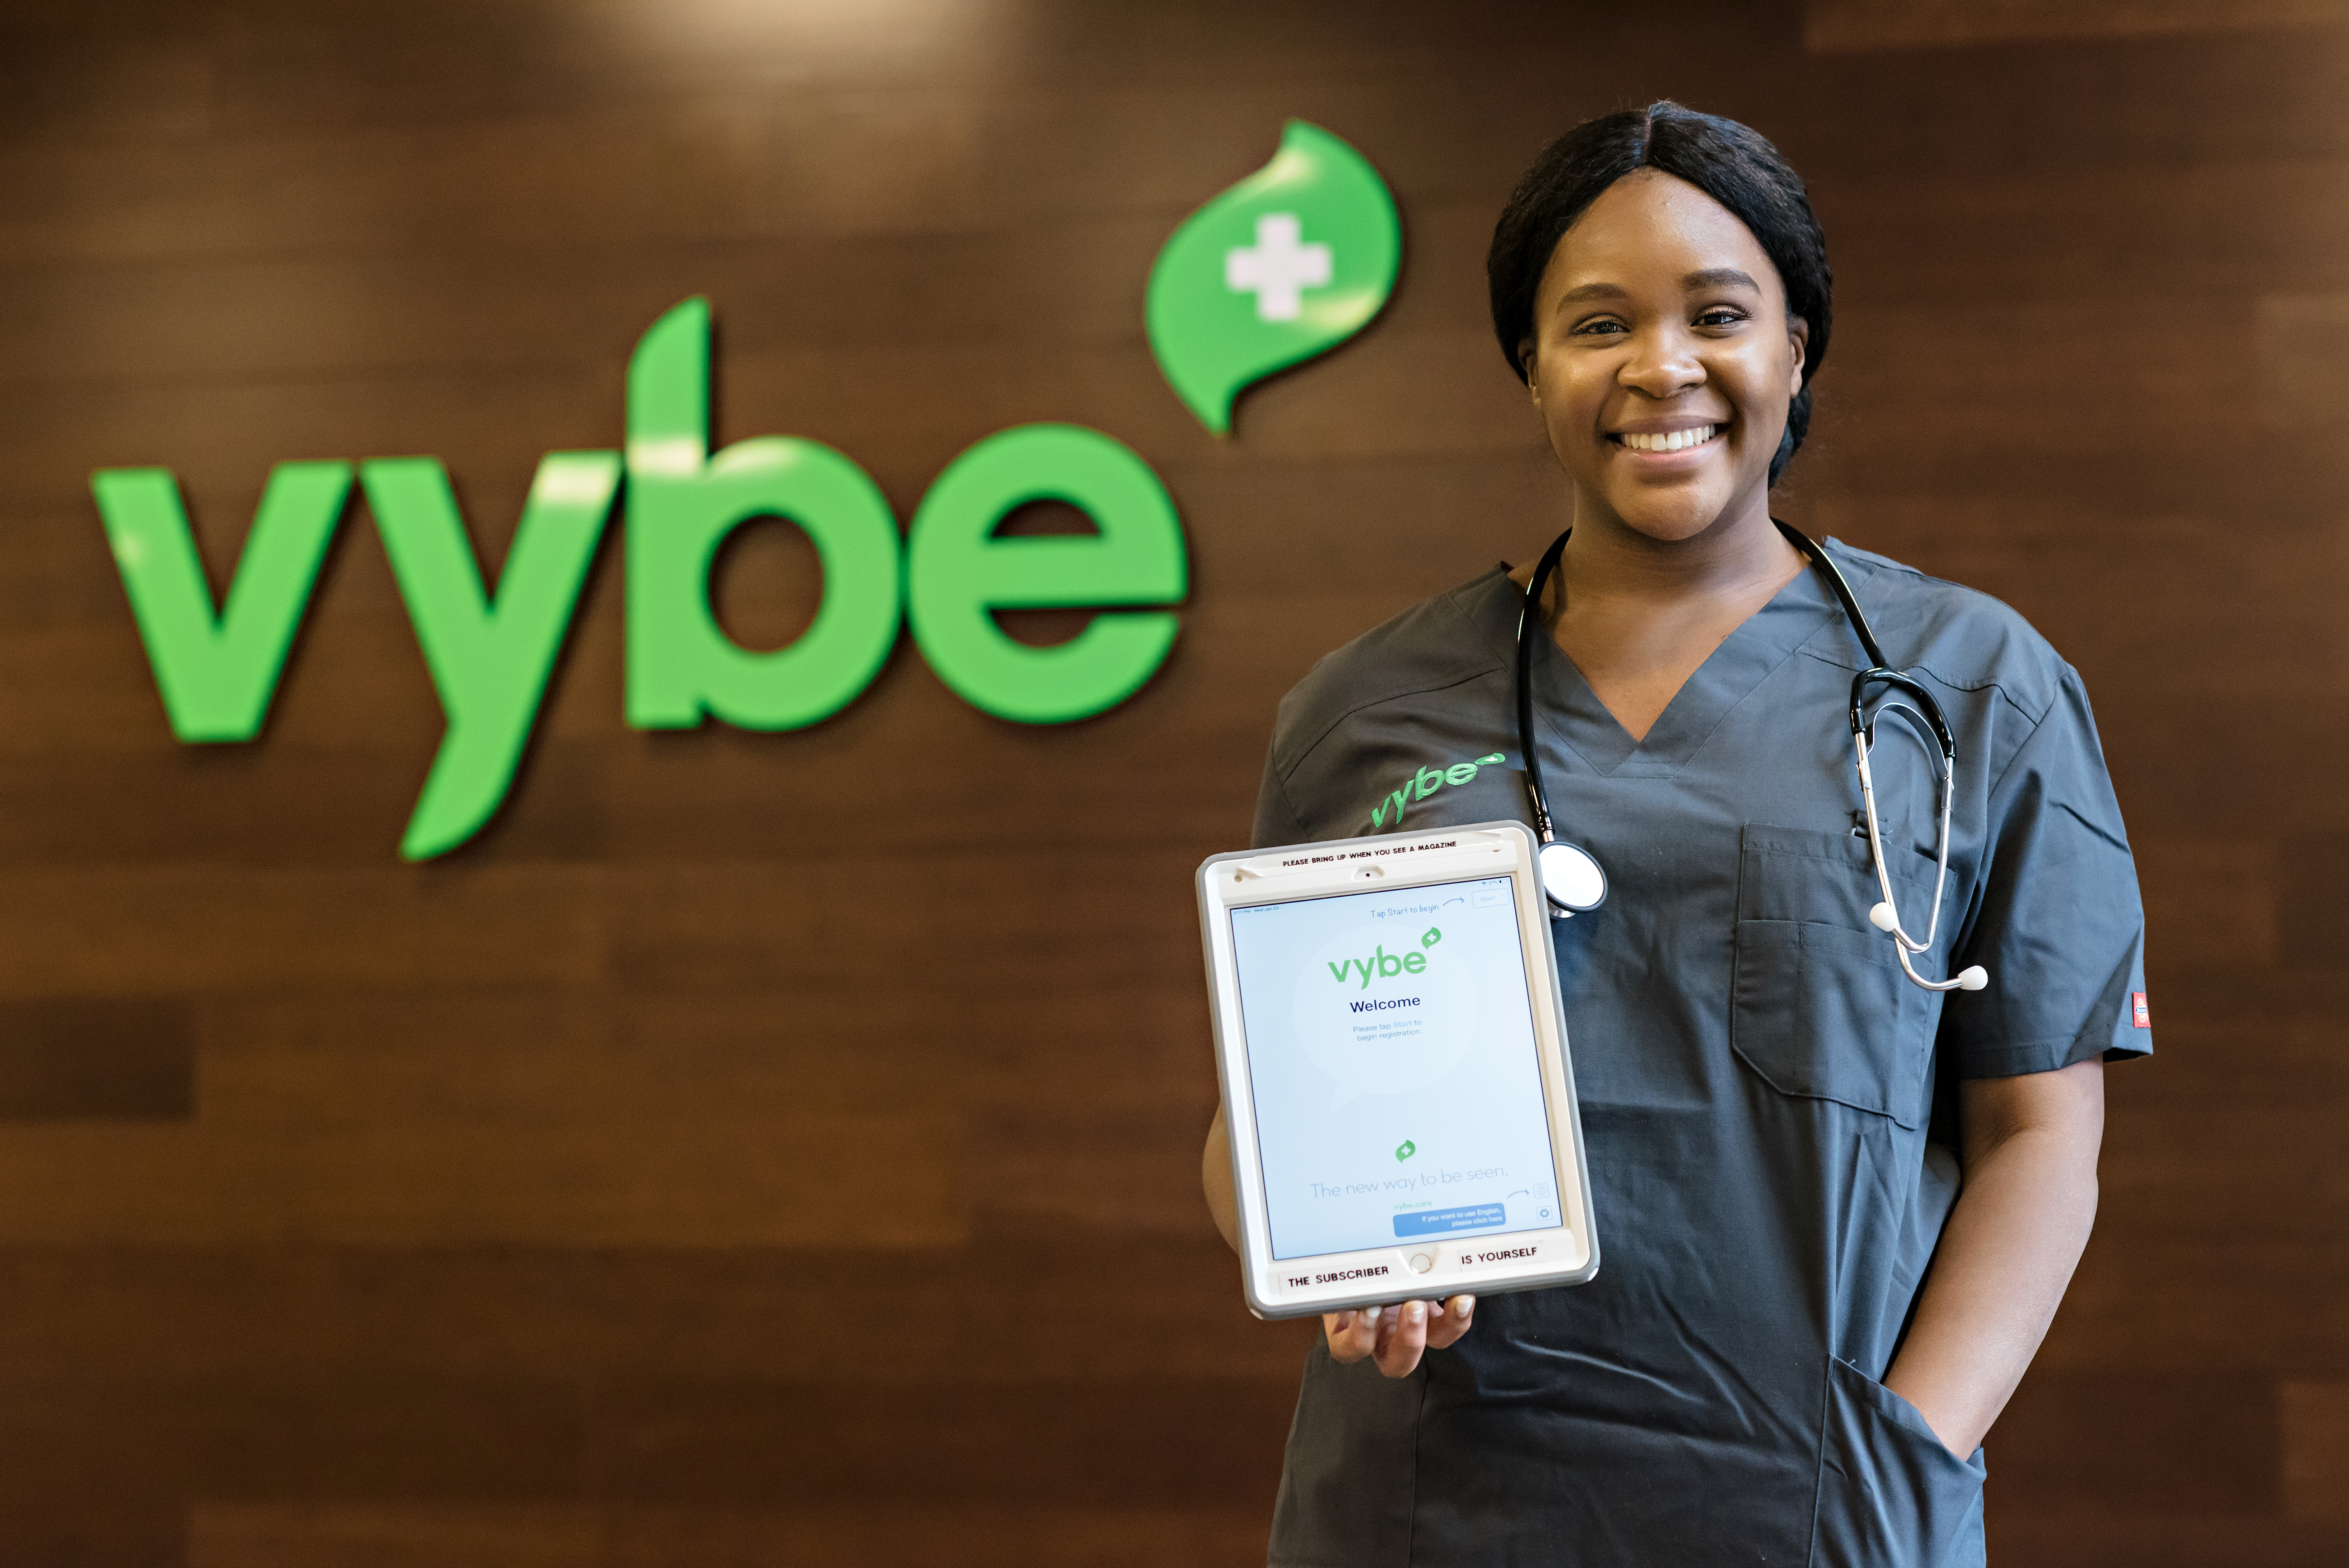 vybe urgent care Adds Moderna Booster To A Full Range Of COVID-19 Services